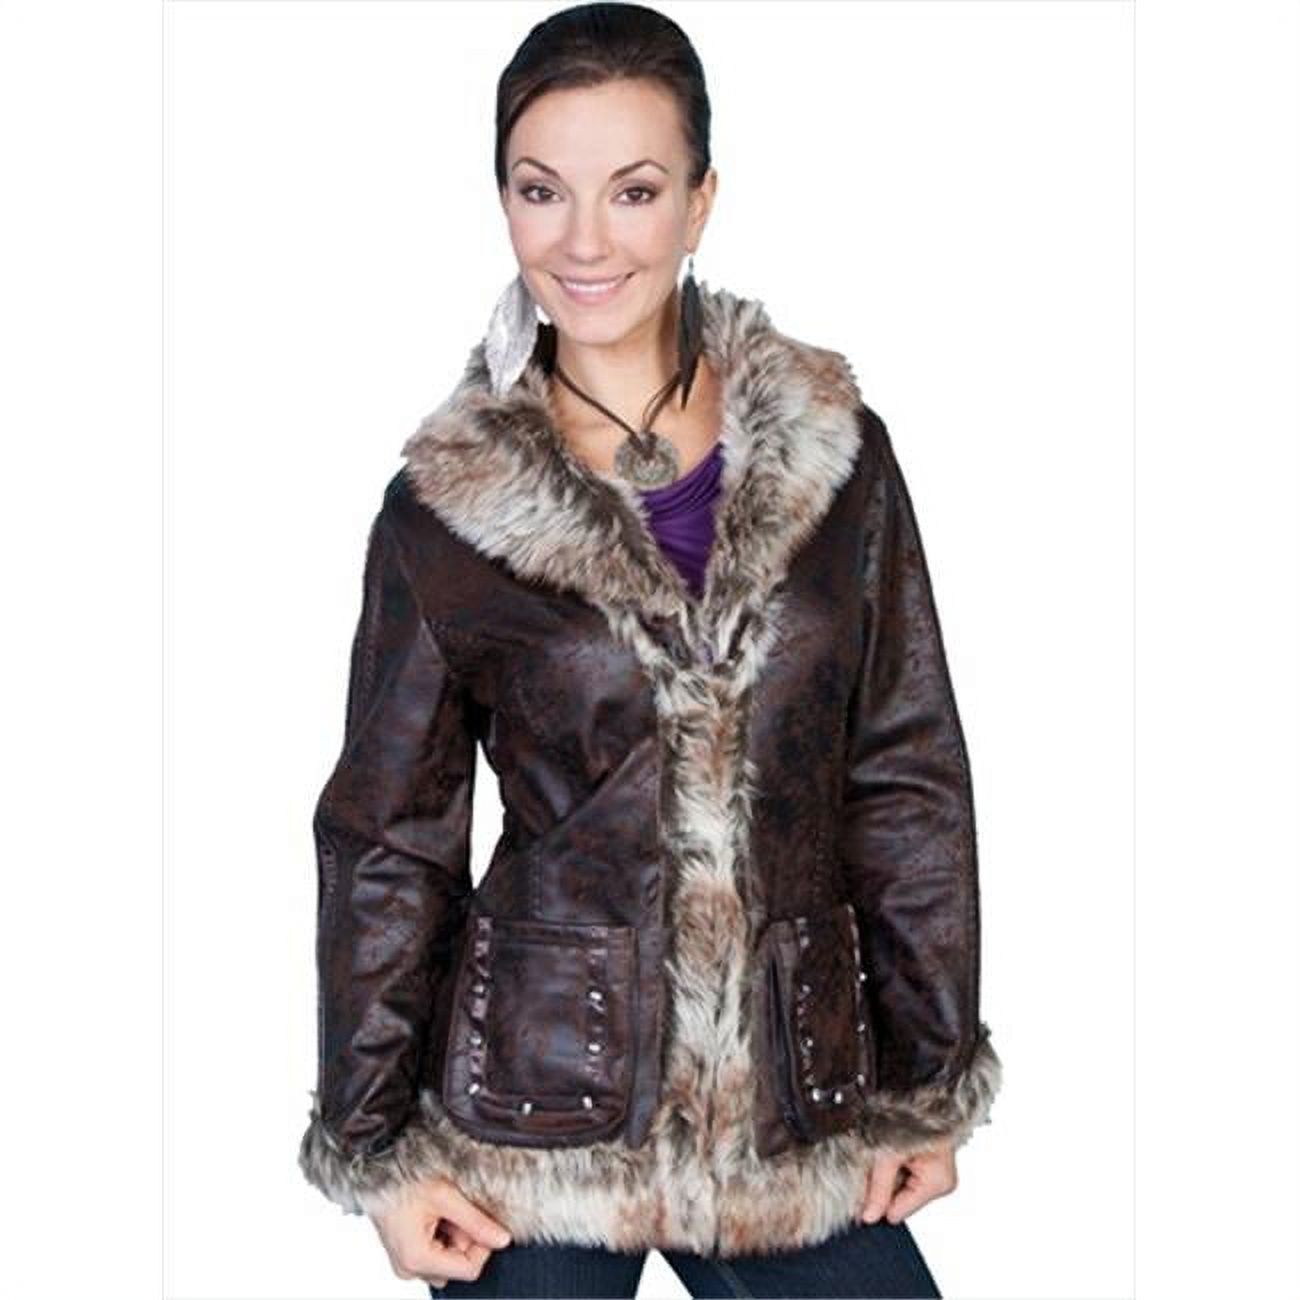 Scully Women's Faux Leather And Fur Jacket Dark Brown Medium  US - image 1 of 2